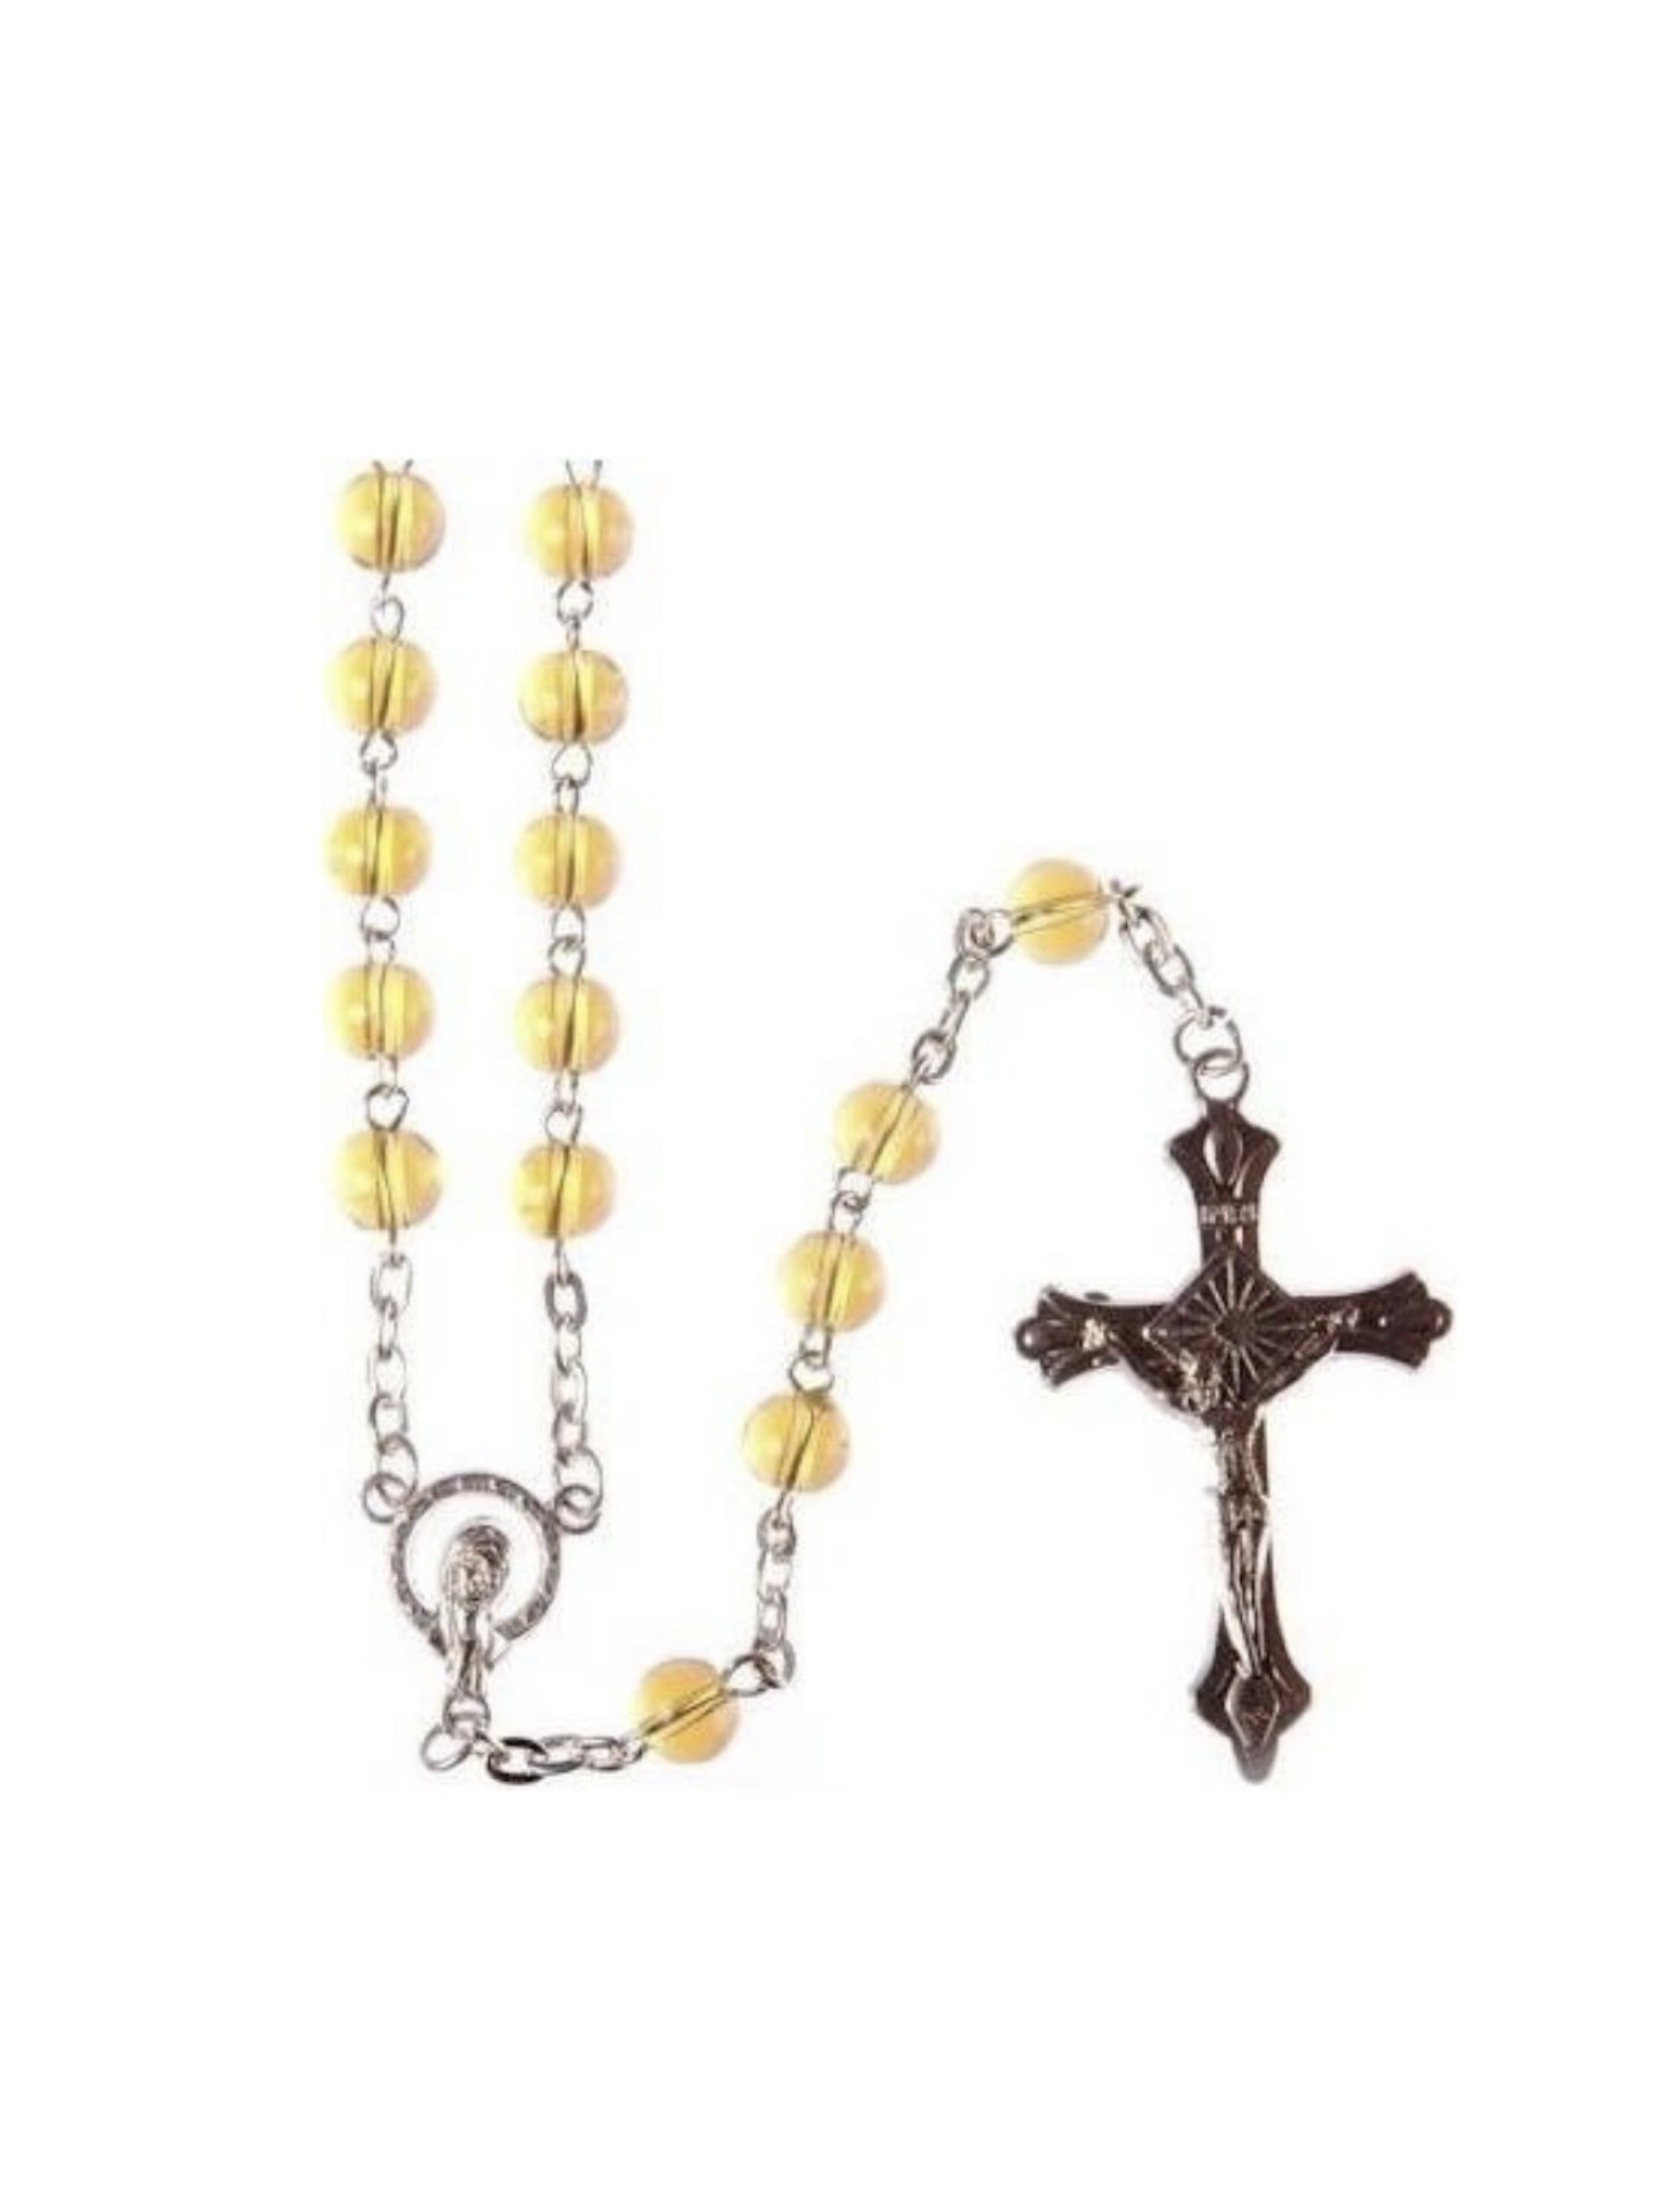 Glass Bead Rosary - Various Colours